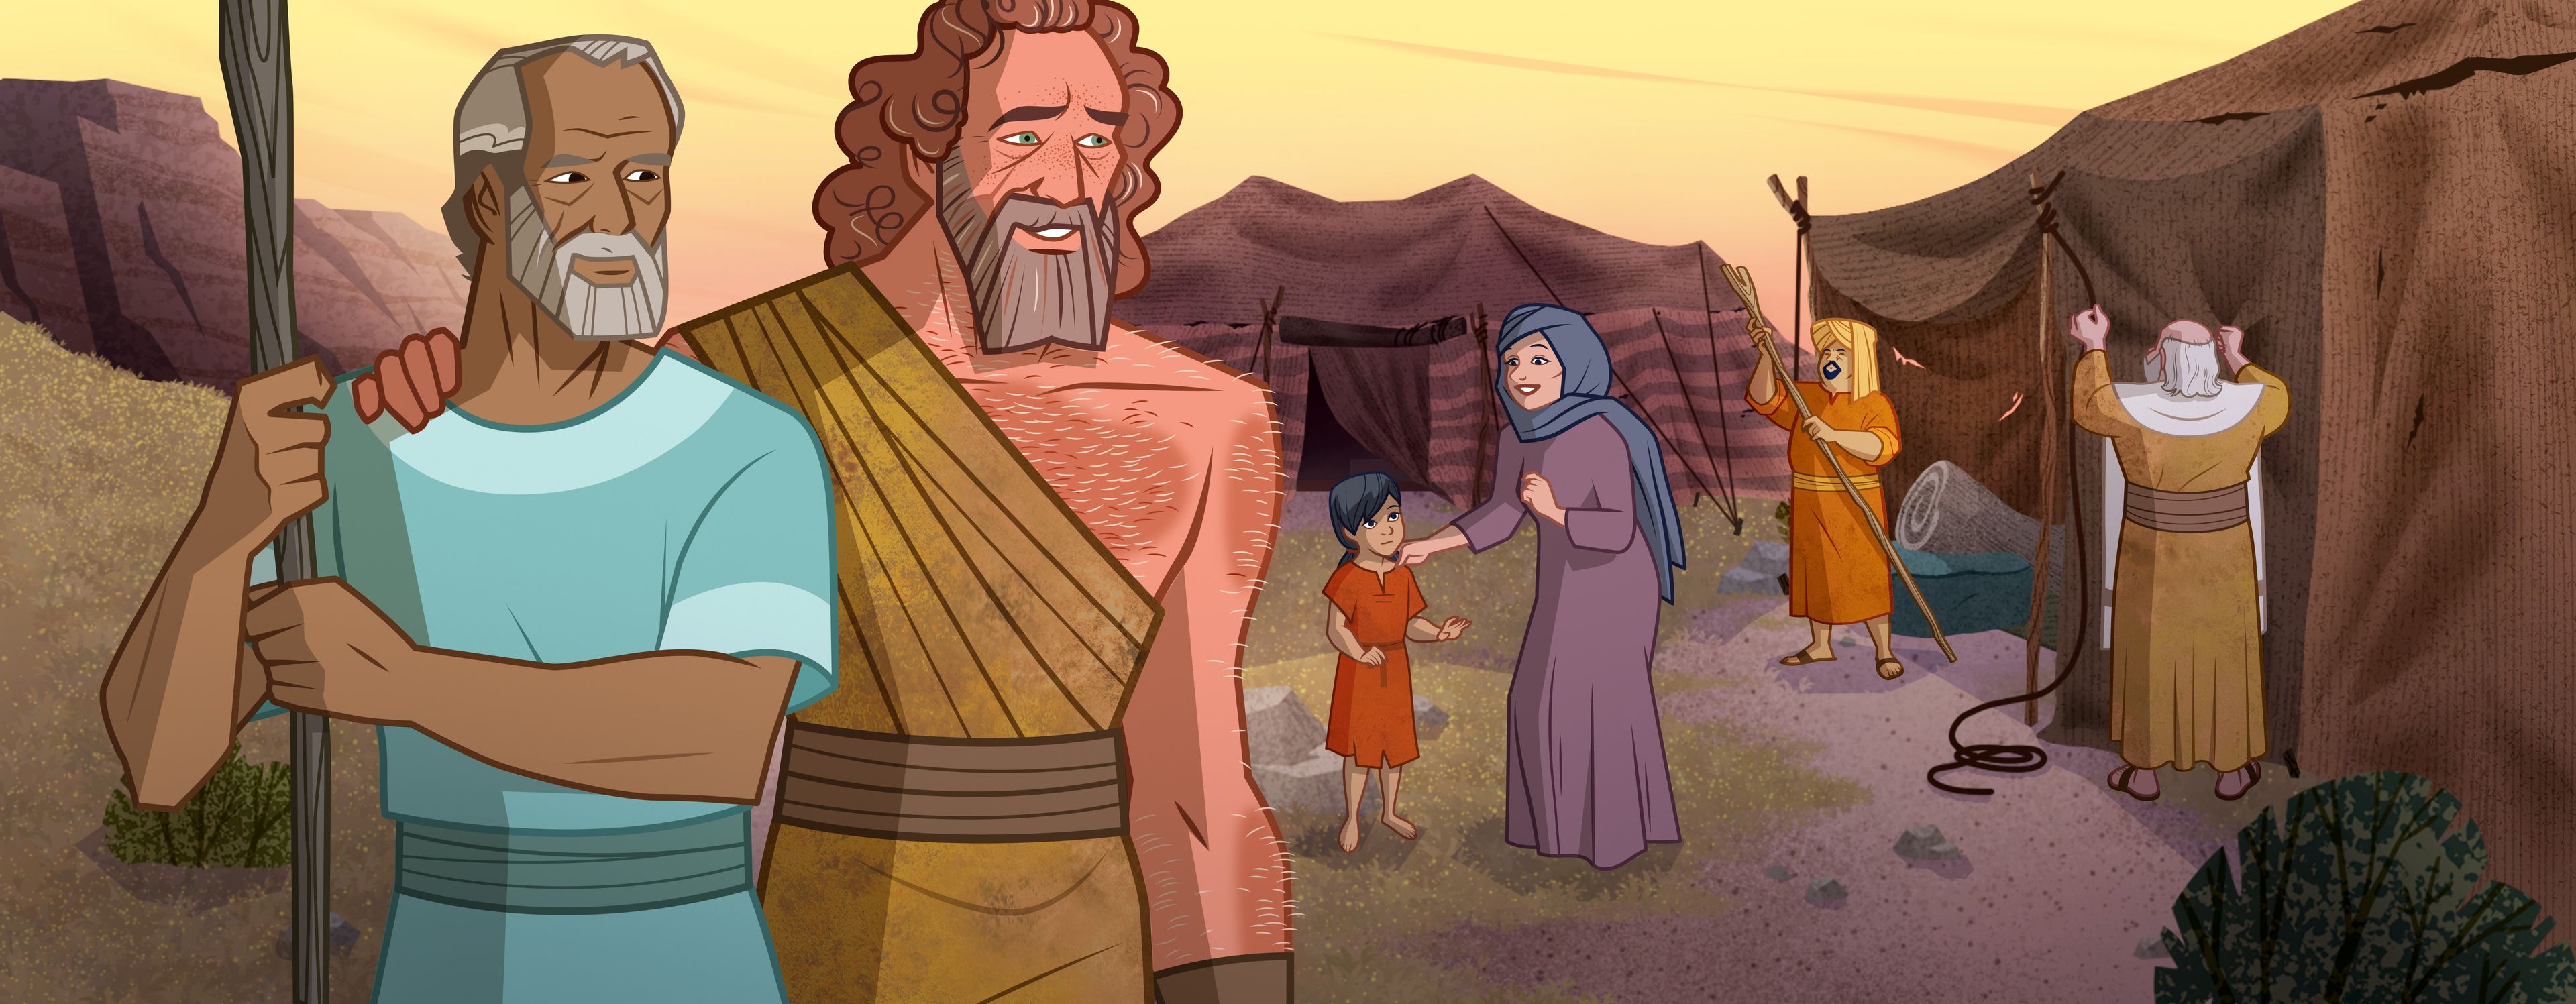 Illustration of Jacob and Esau looking at family. Genesis 33:17–20